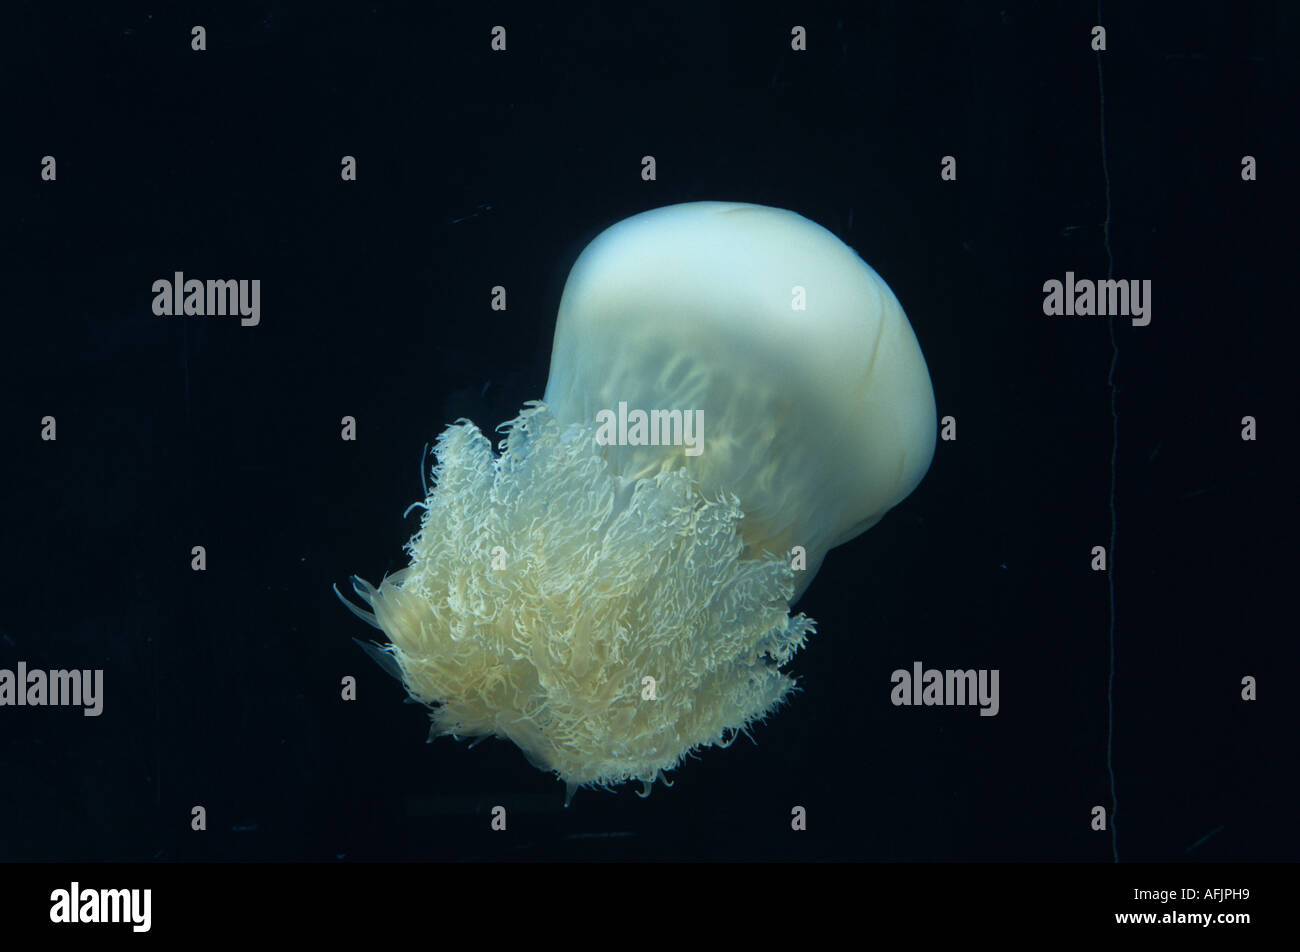 EDIBLE JELLYFISH FLOATING IN THE WATER Stock Photo